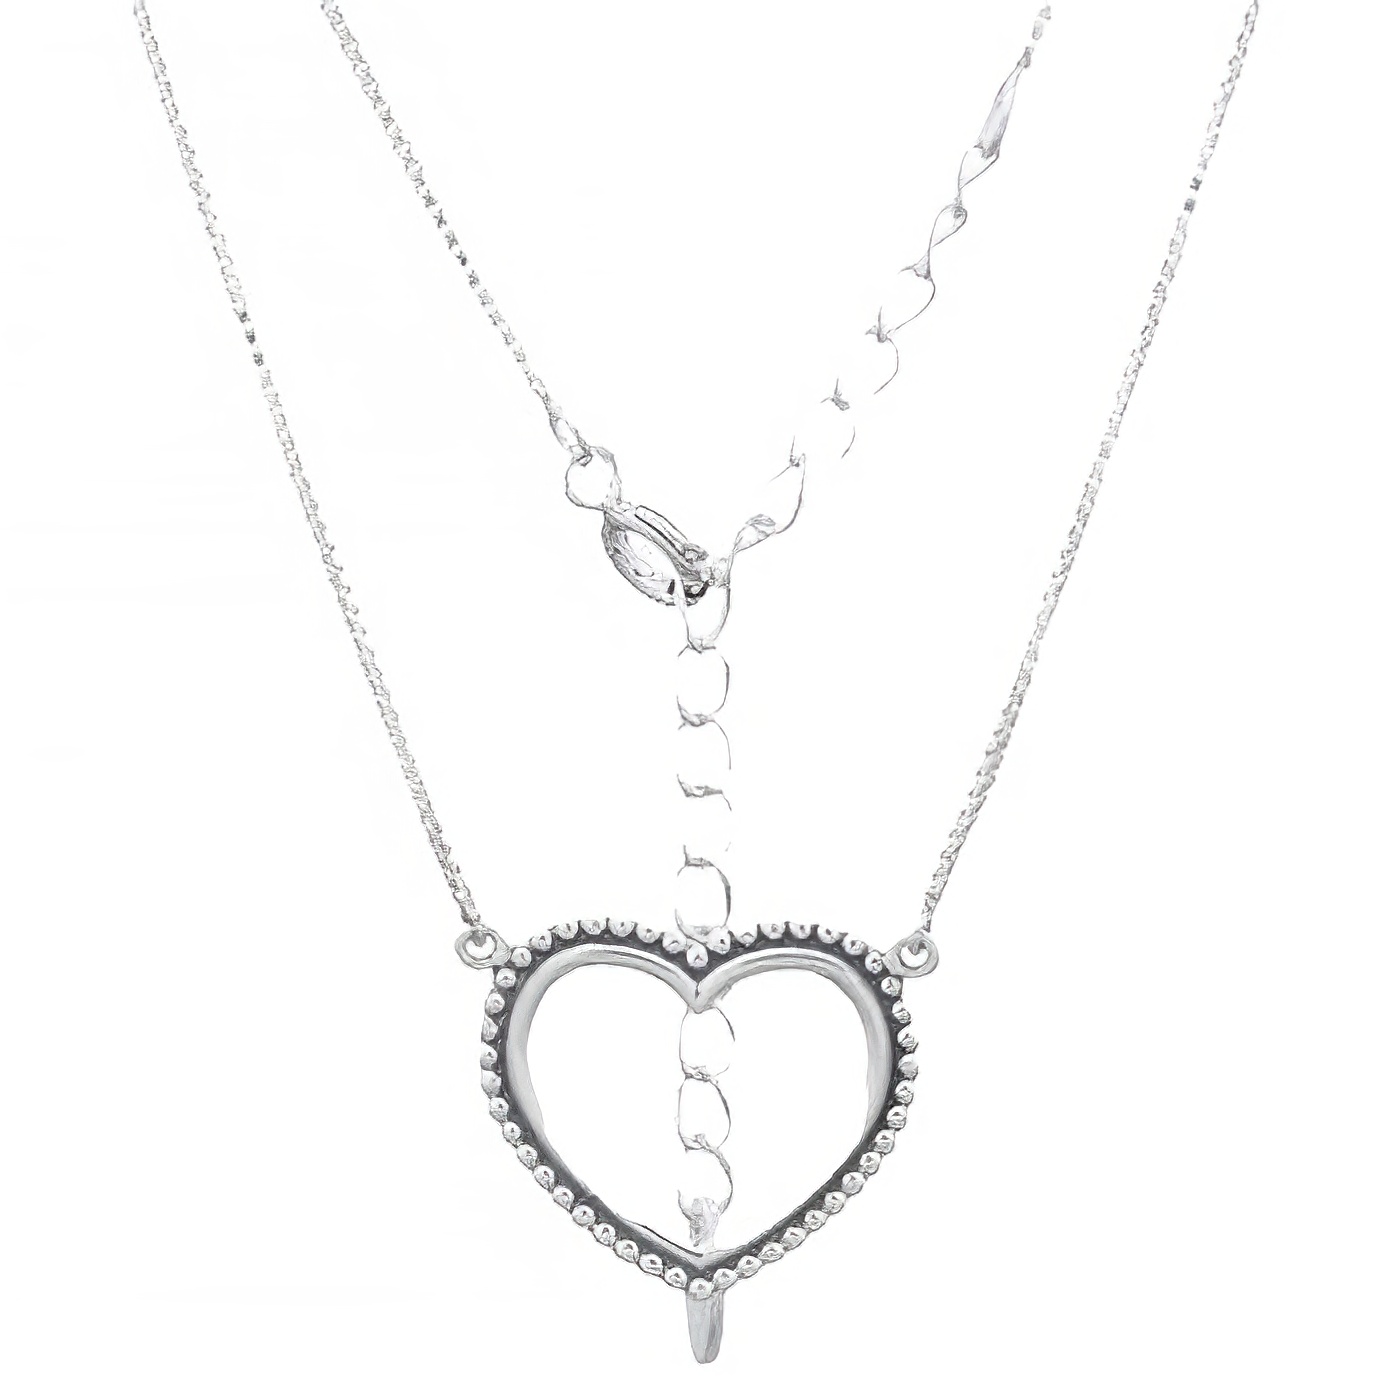 Vintage Heart 925 Silver Box Chain Necklace 